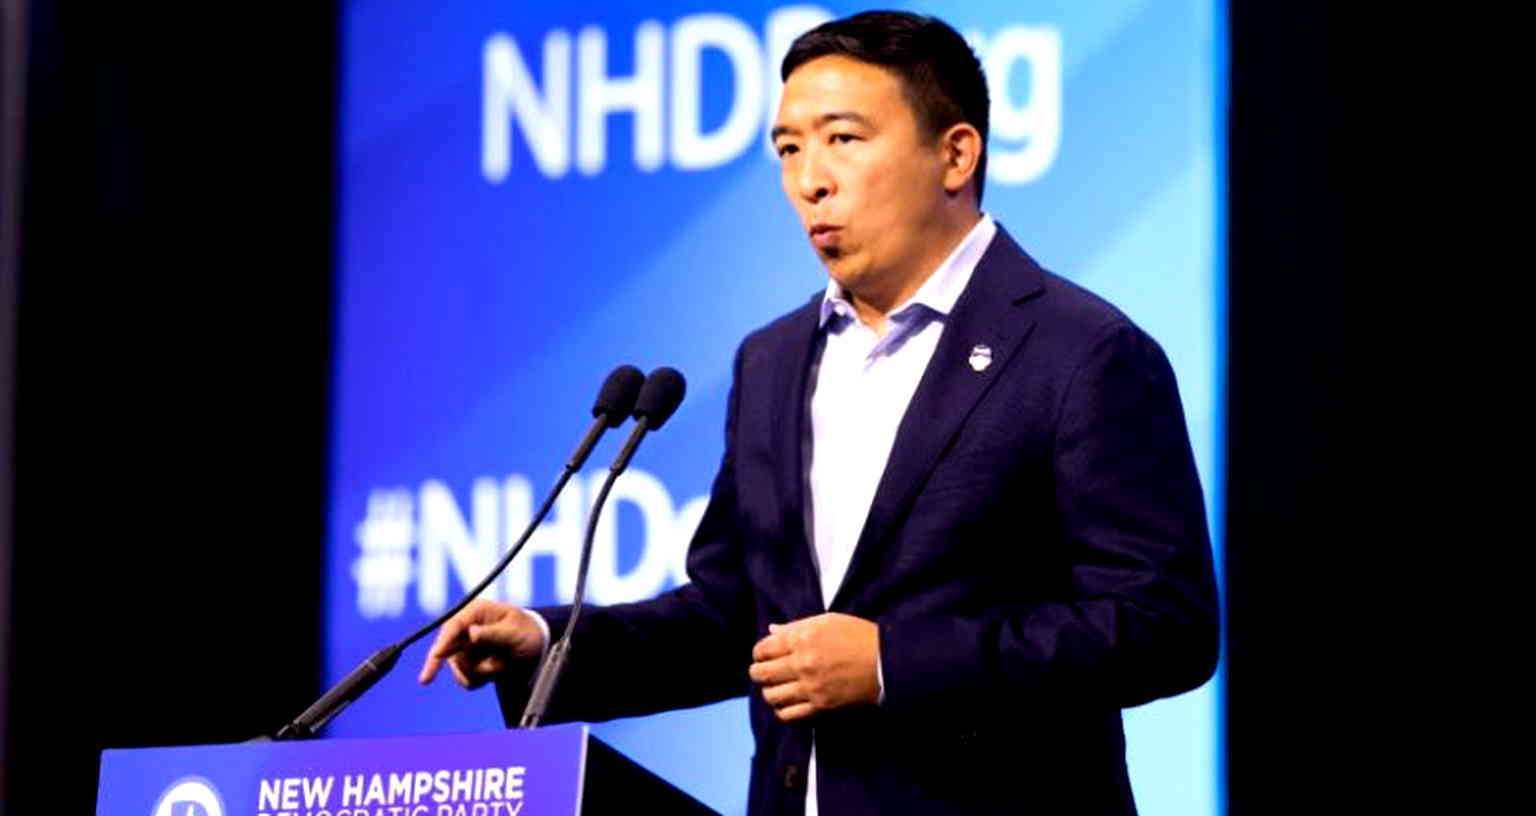 Andrew Yang’s Team Threatened With Shooting in New Hampshire, FBI Called In